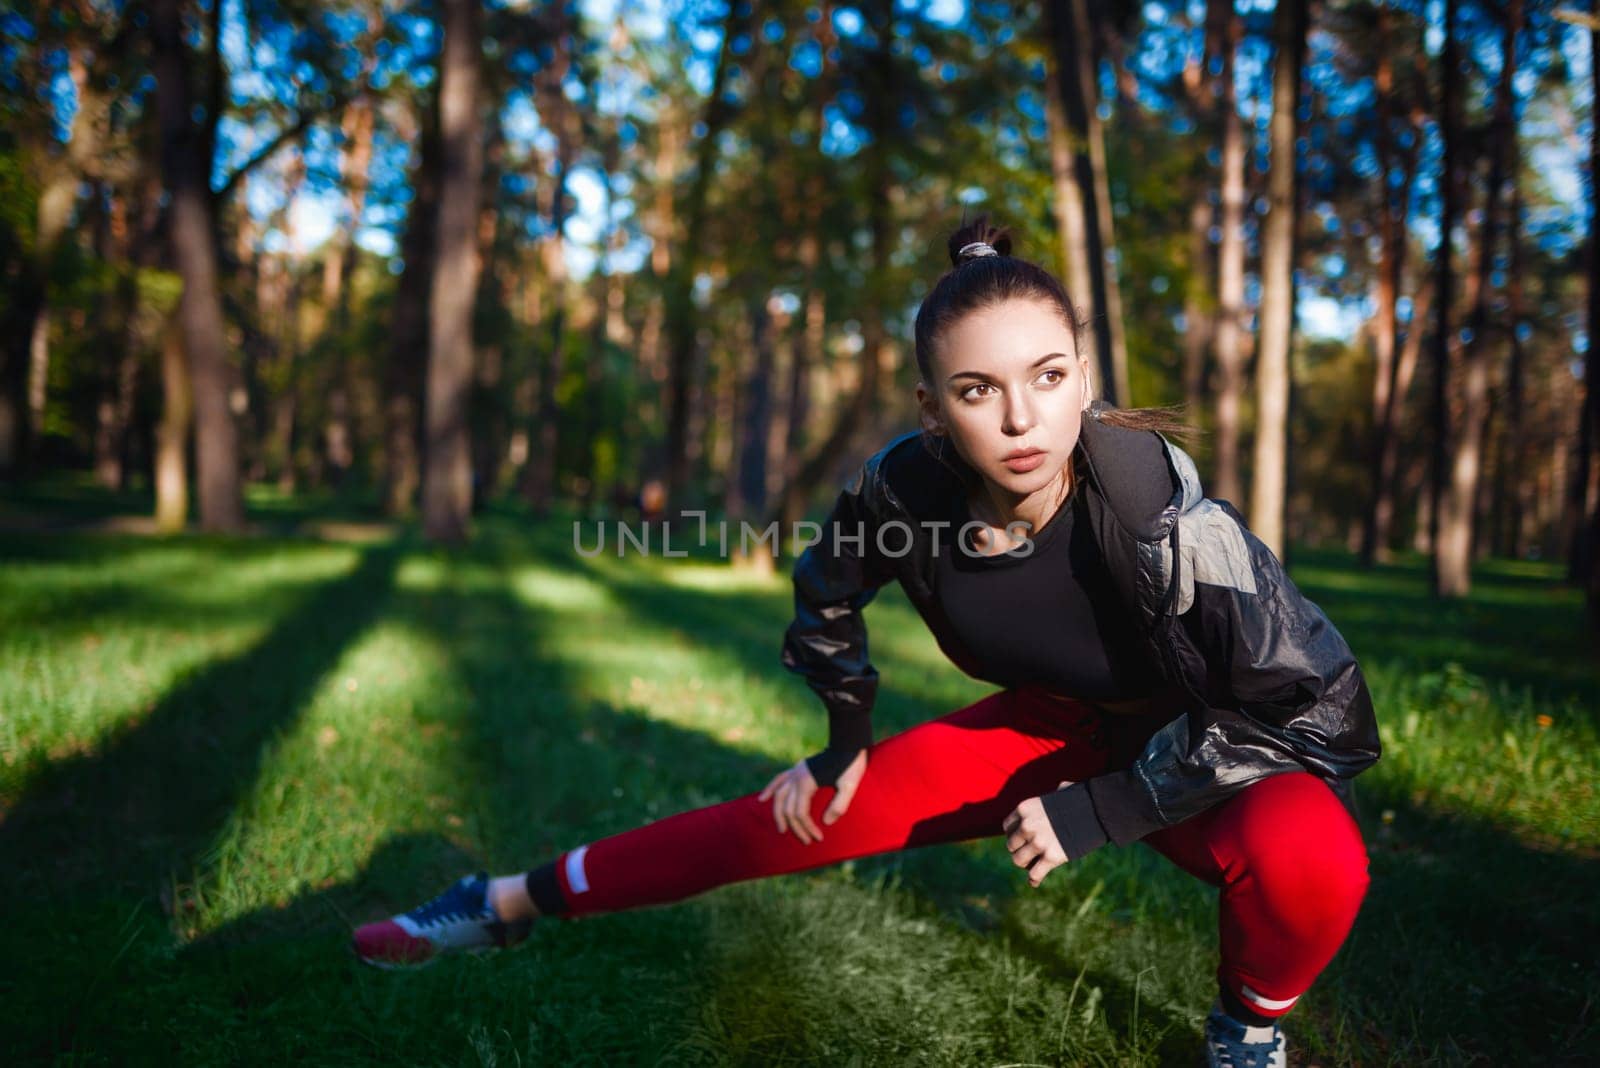 Focused young woman performs a stretch routine in a serene forest, embracing a healthy lifestyle